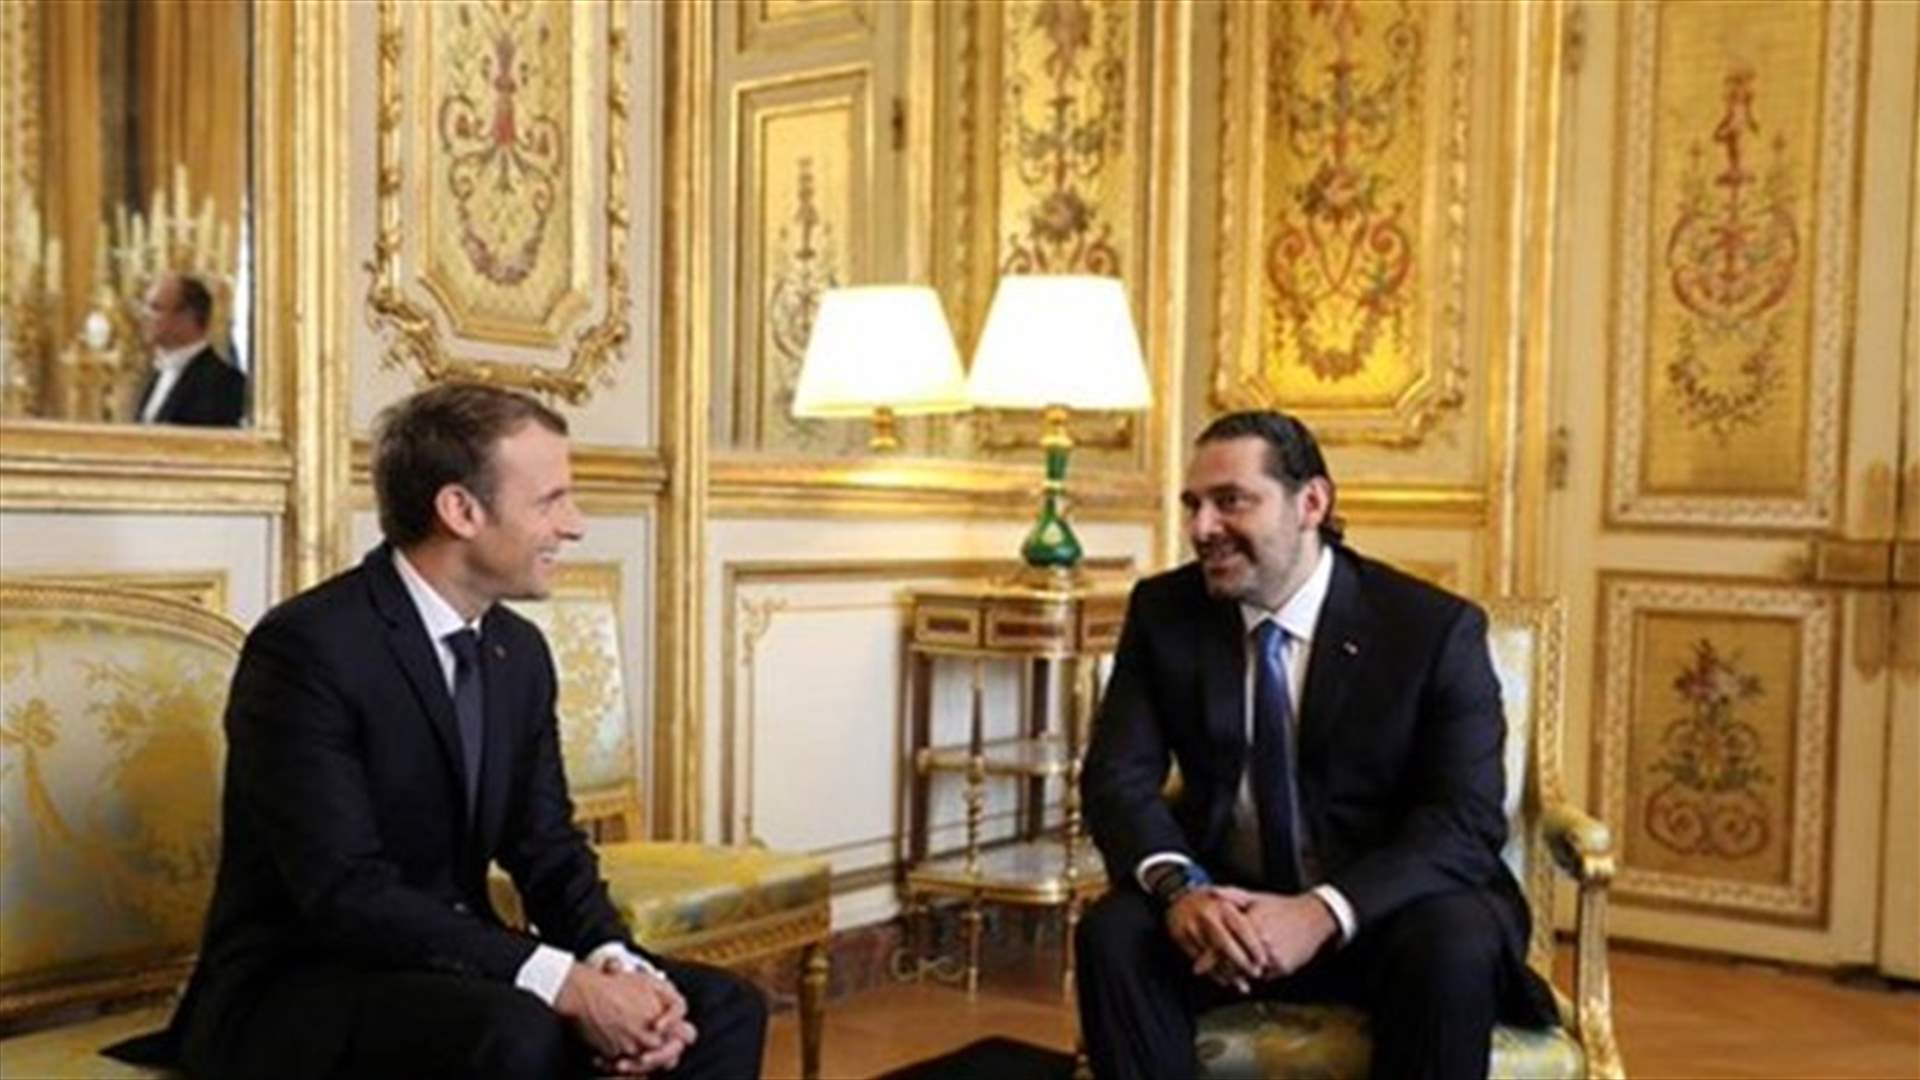 France ready to host international meeting on Lebanon if needed